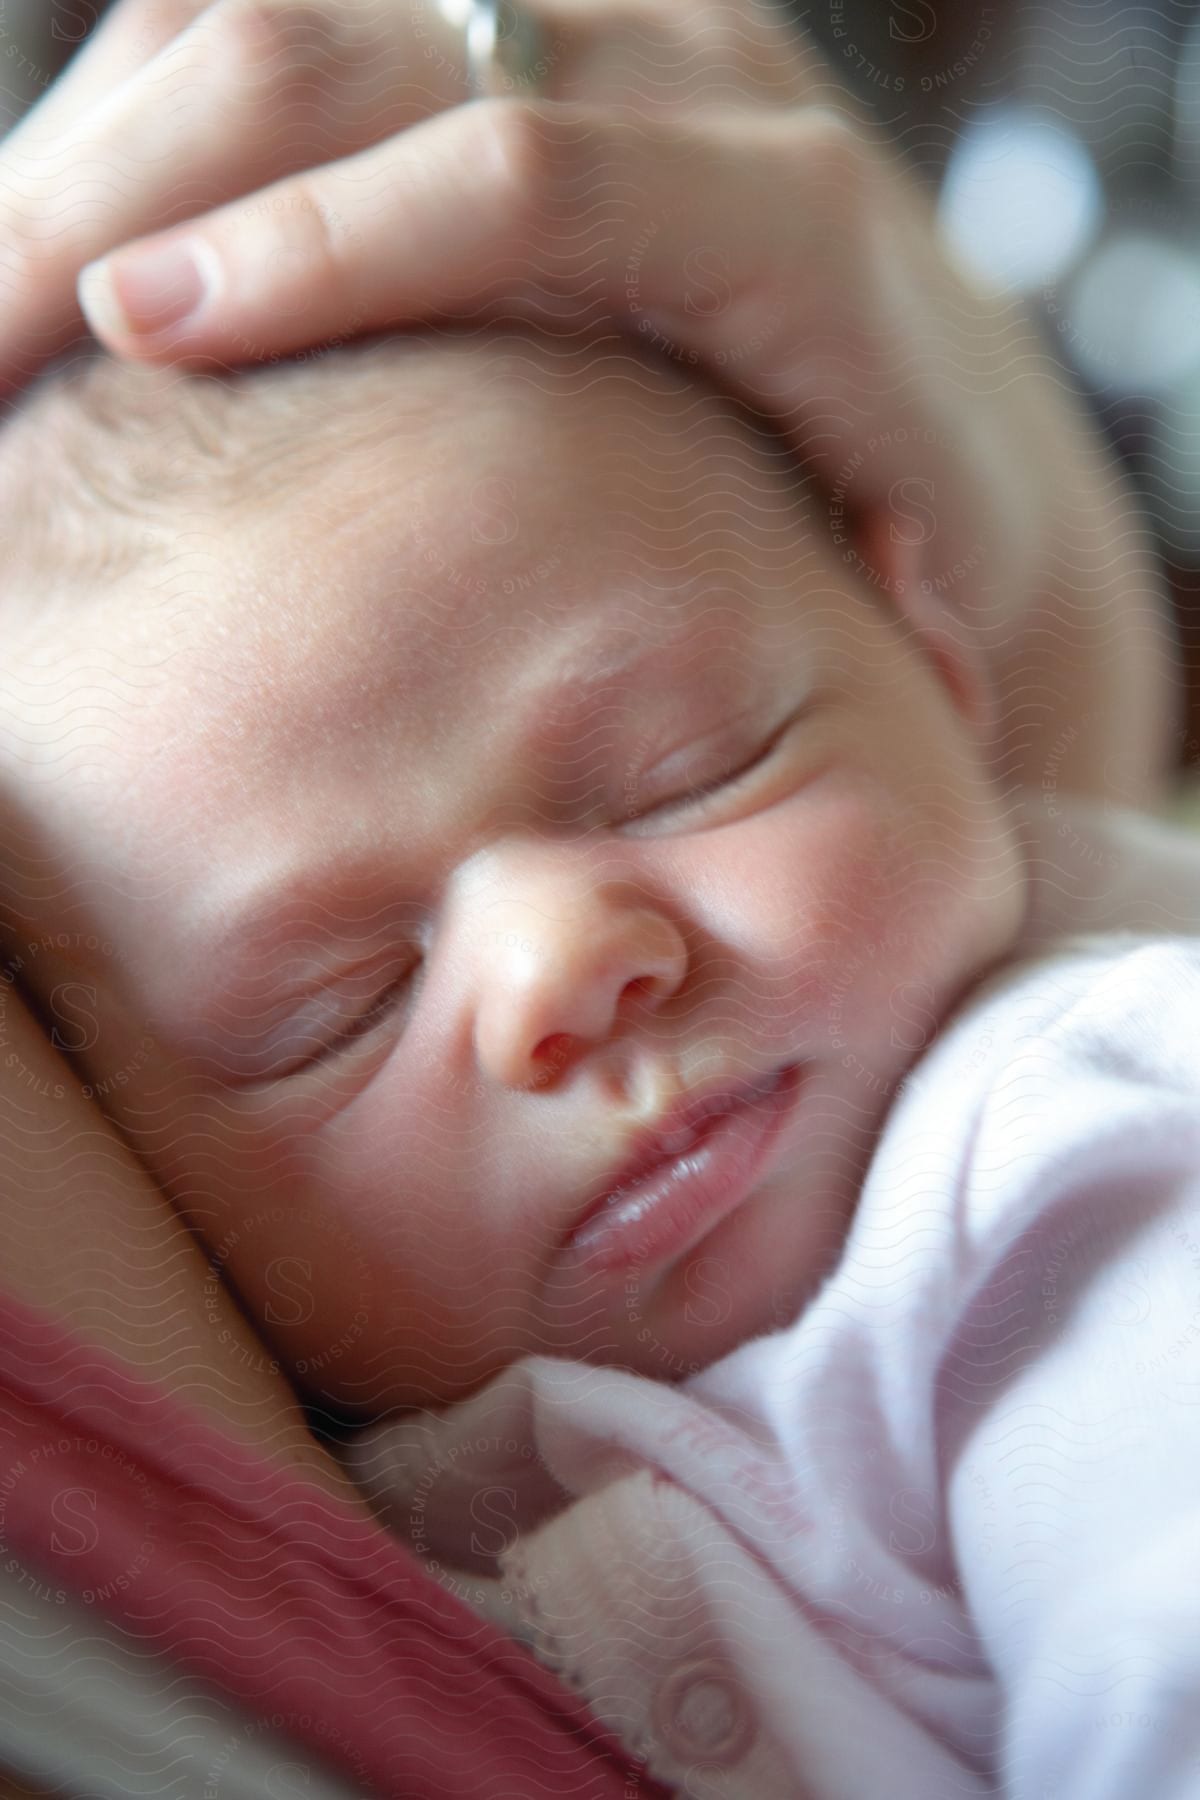 A woman holds her sleeping baby in her arms